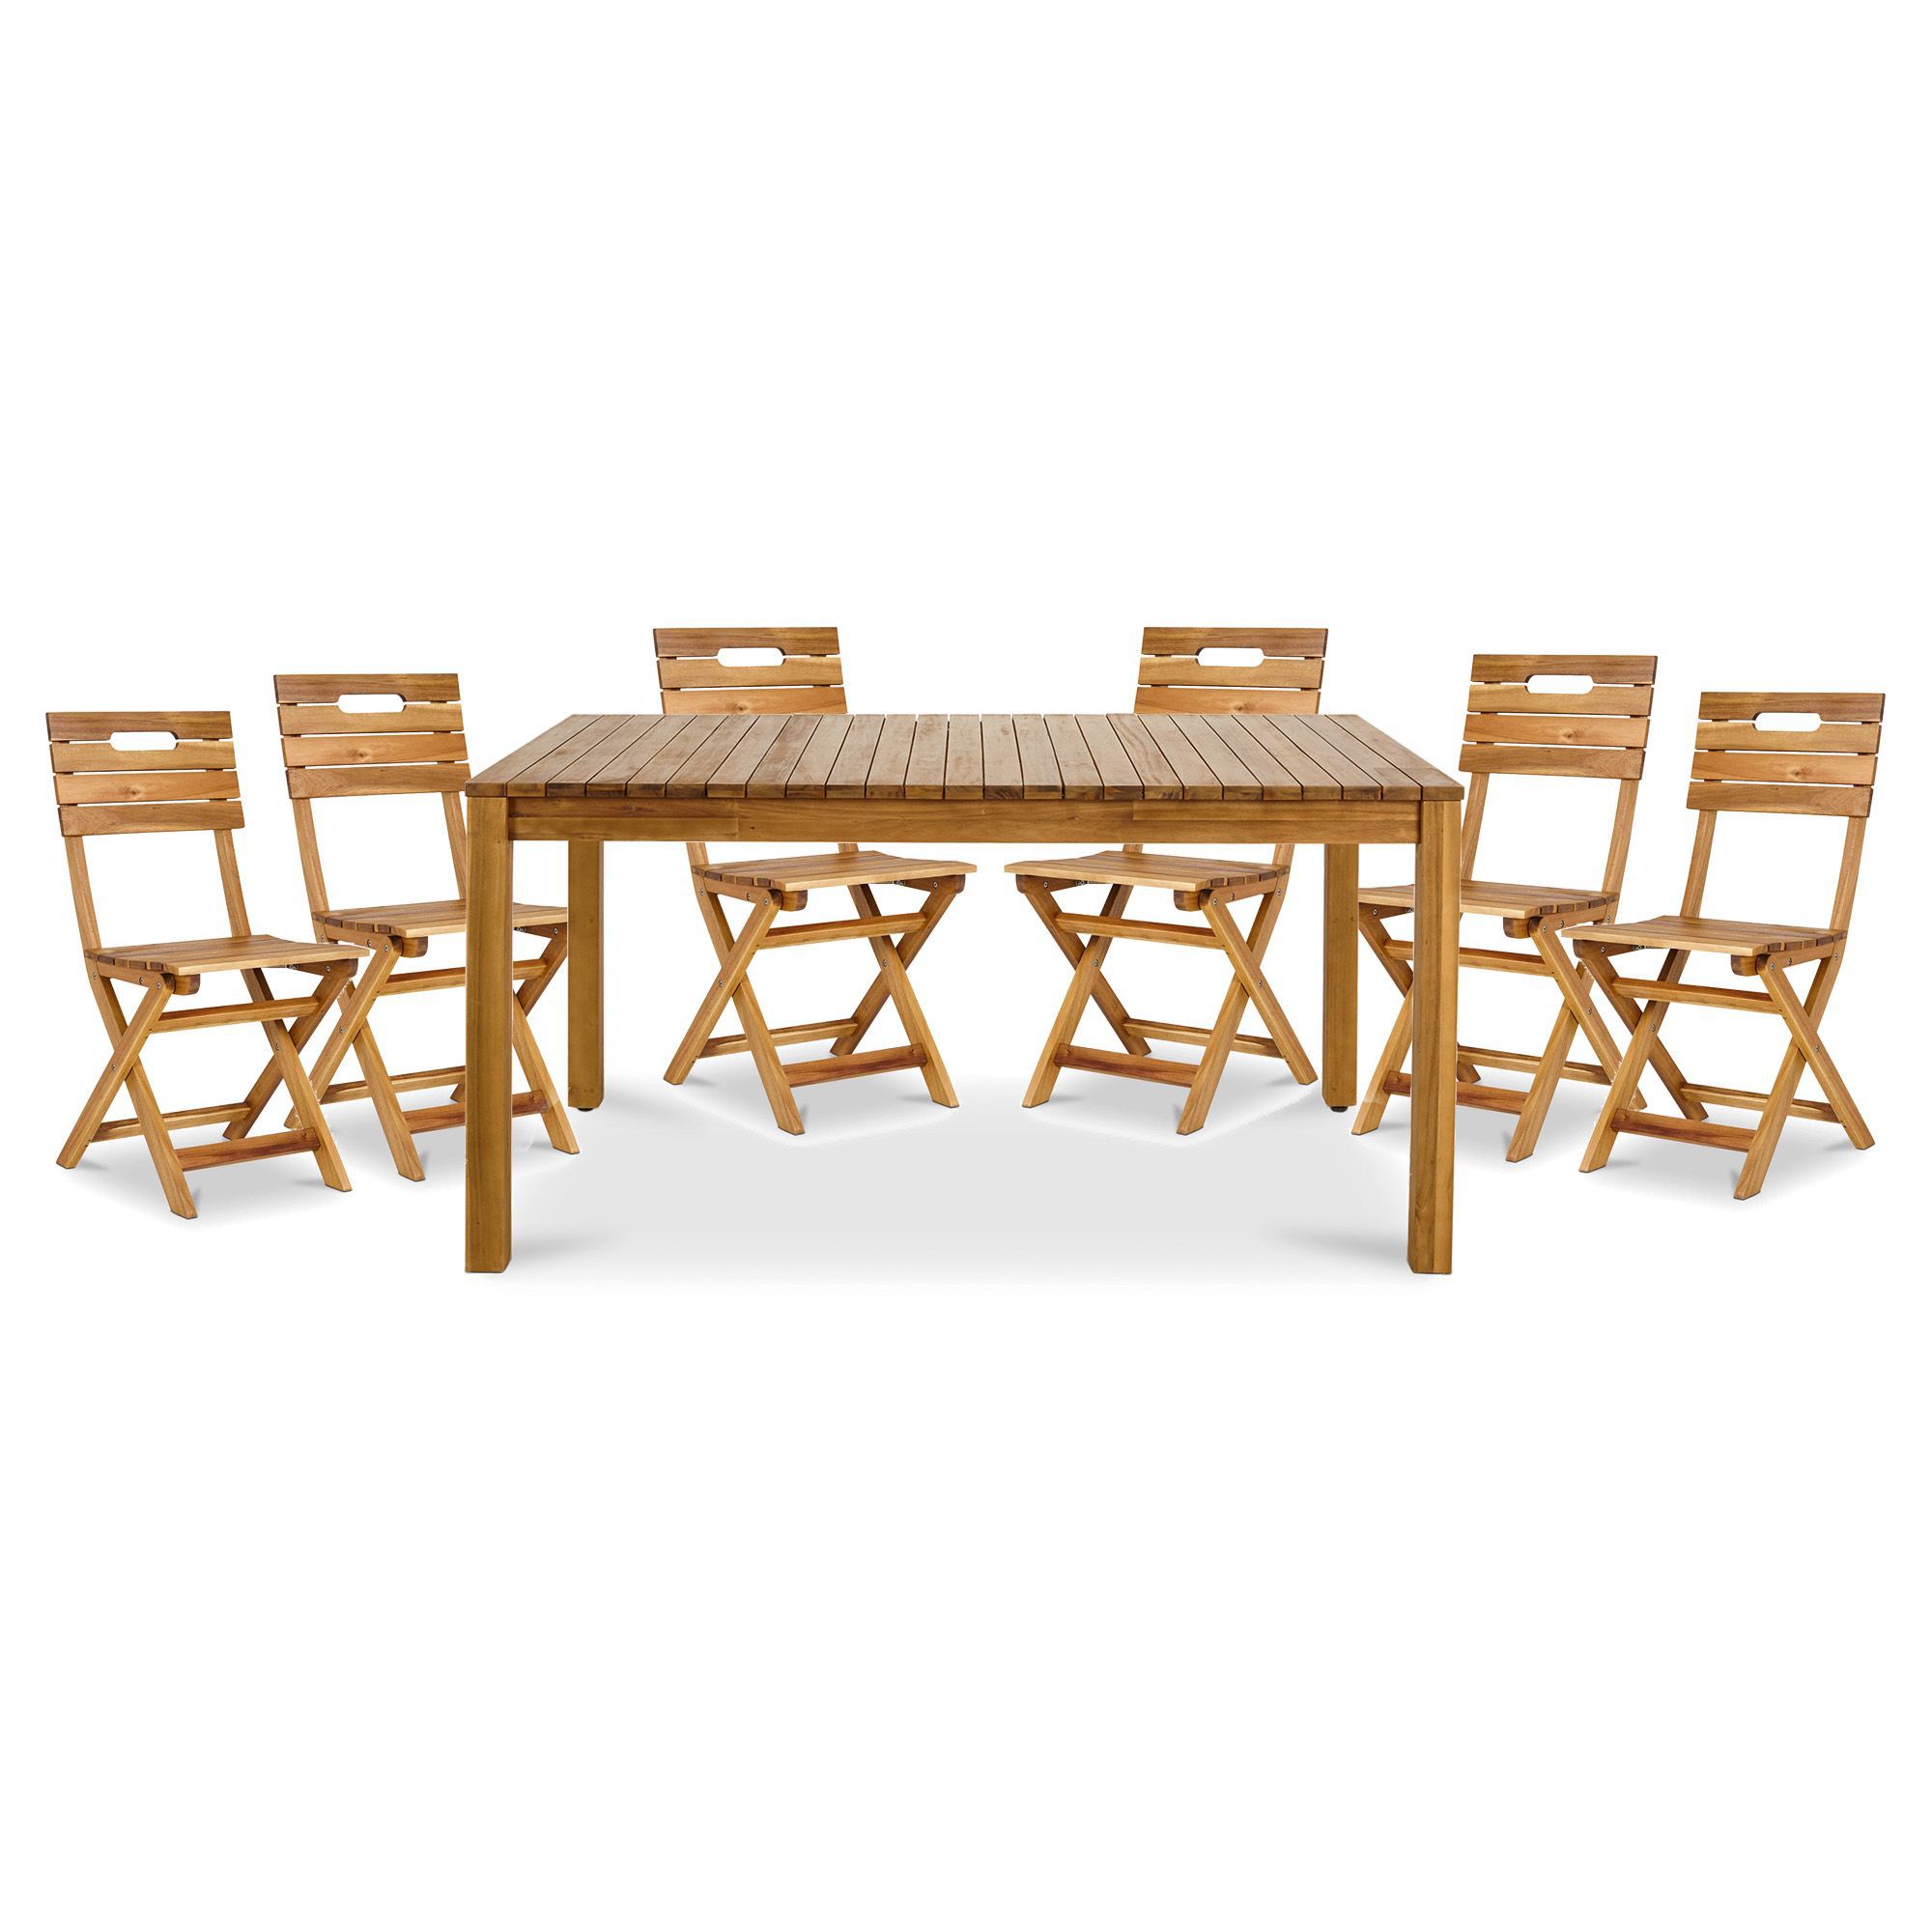 Denia Wooden 6 seater Dining set with Standard chairs